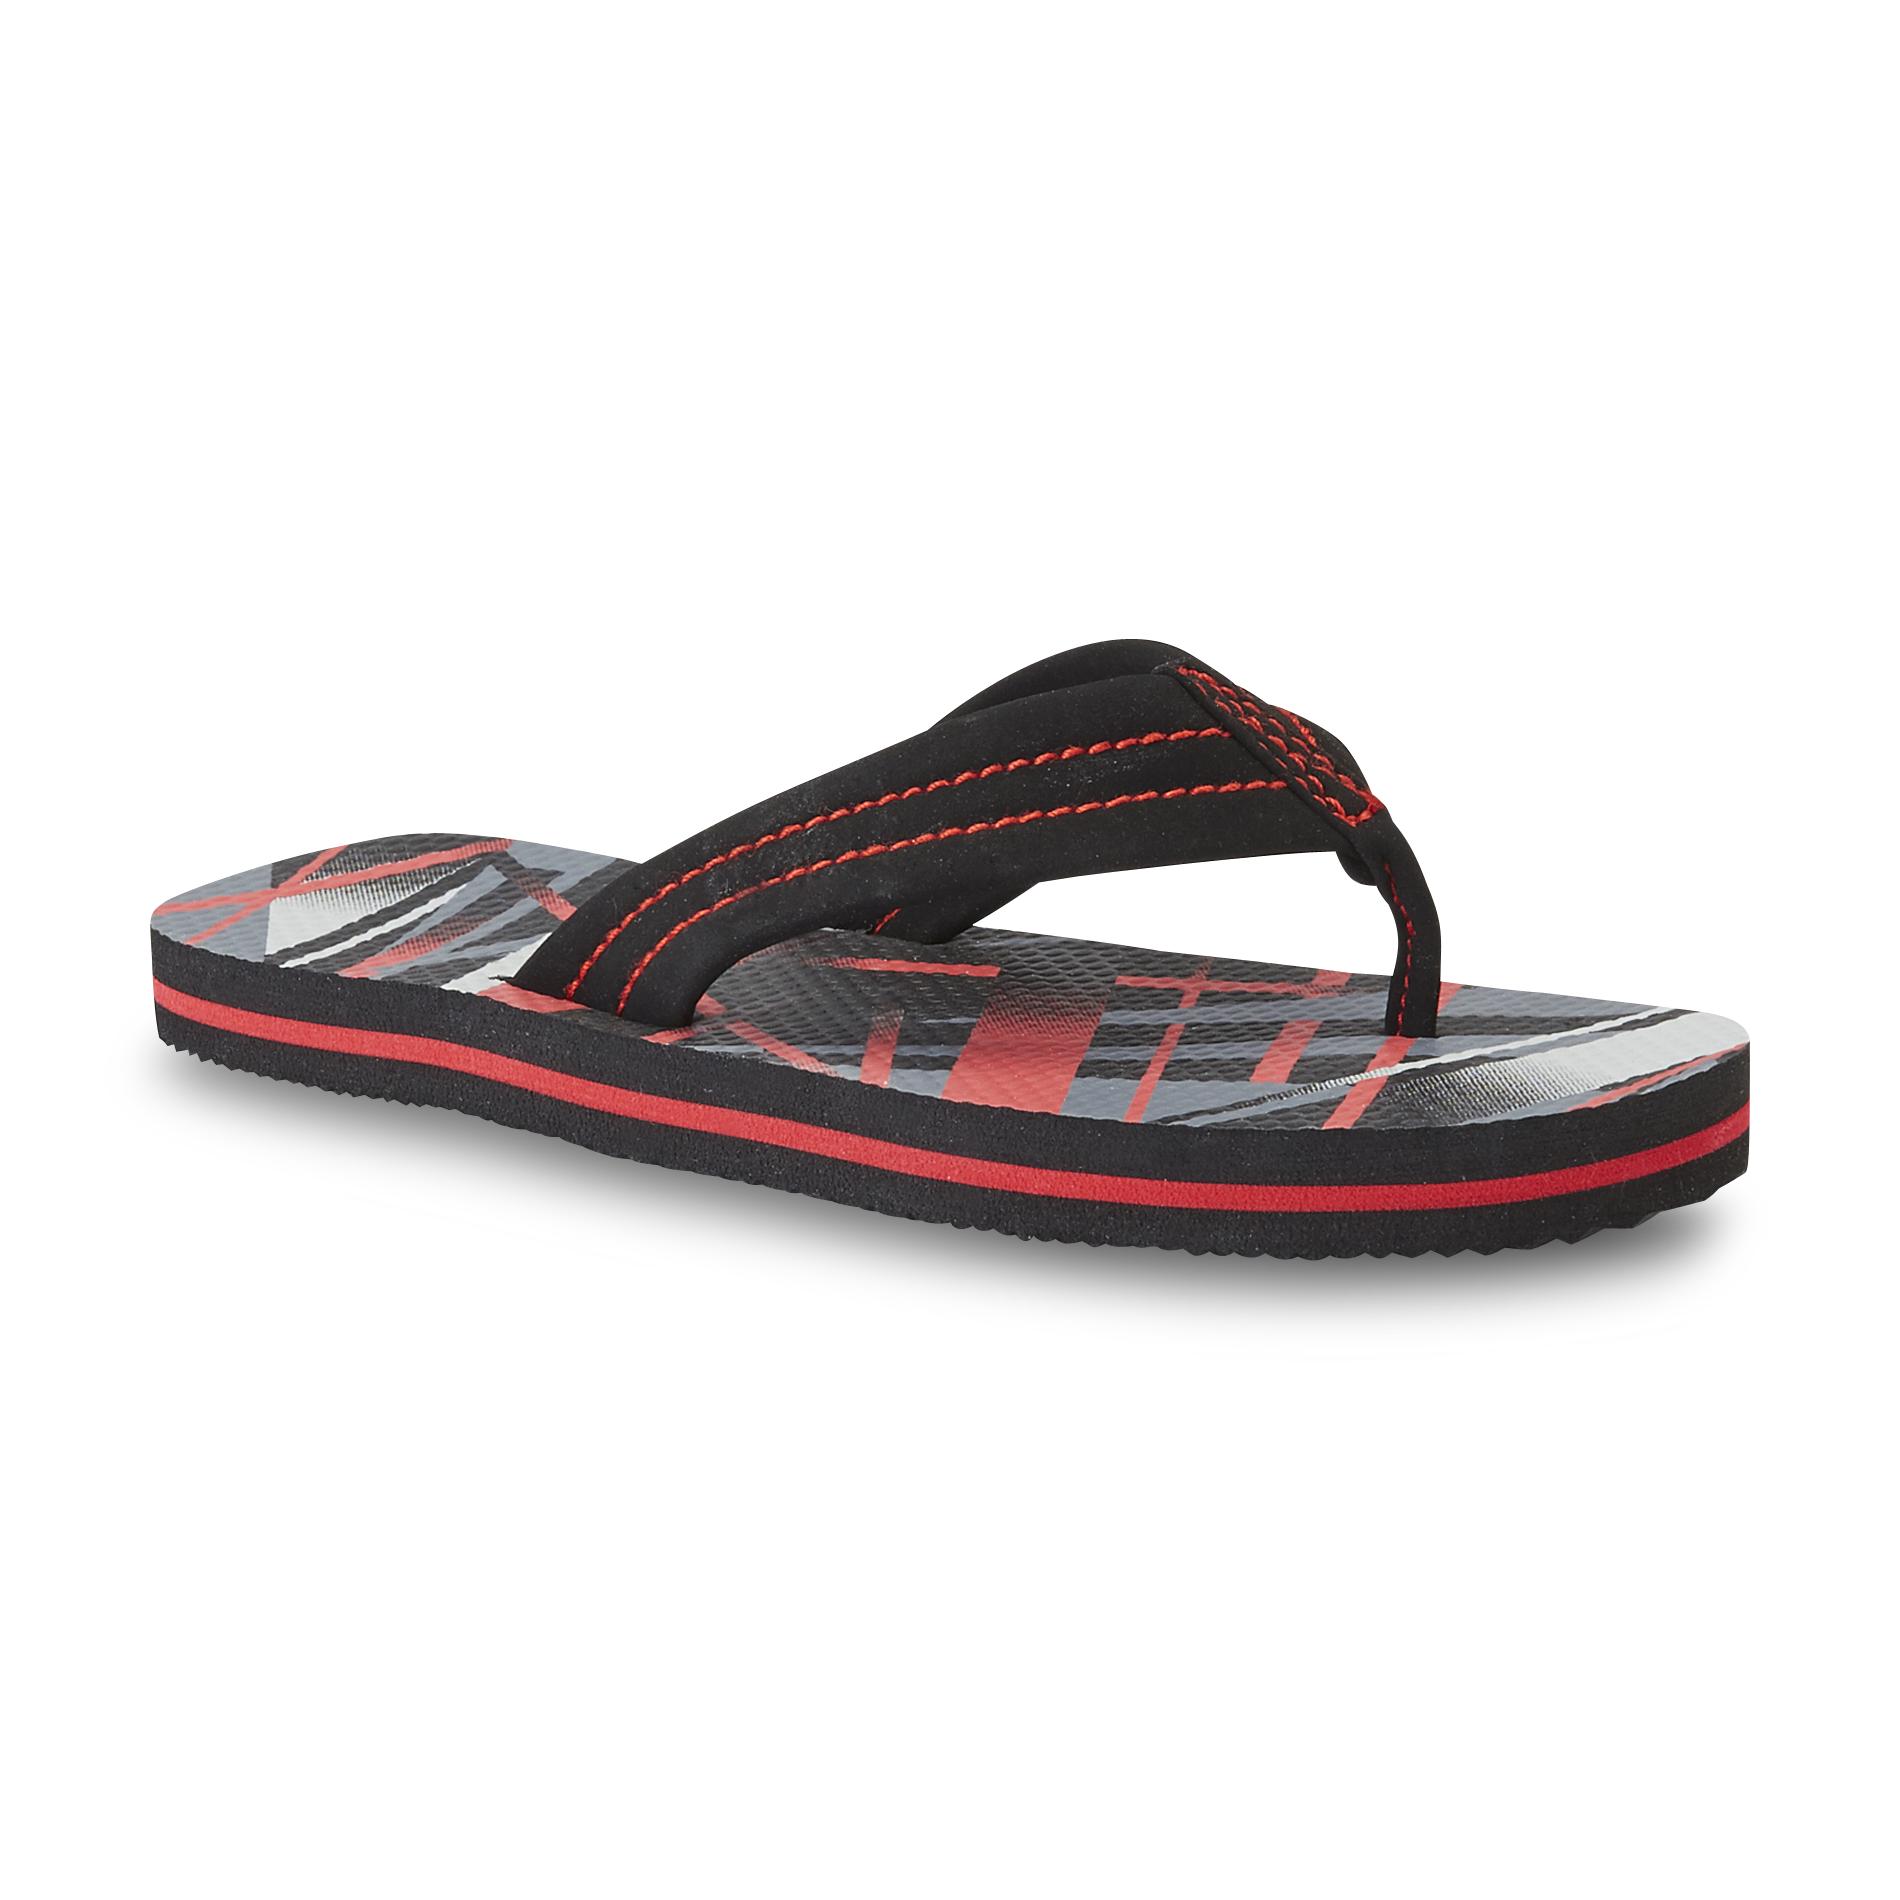 Personal Identity Toddler/Youth Boy's Norris Red/Black/Gray Flip-Flop